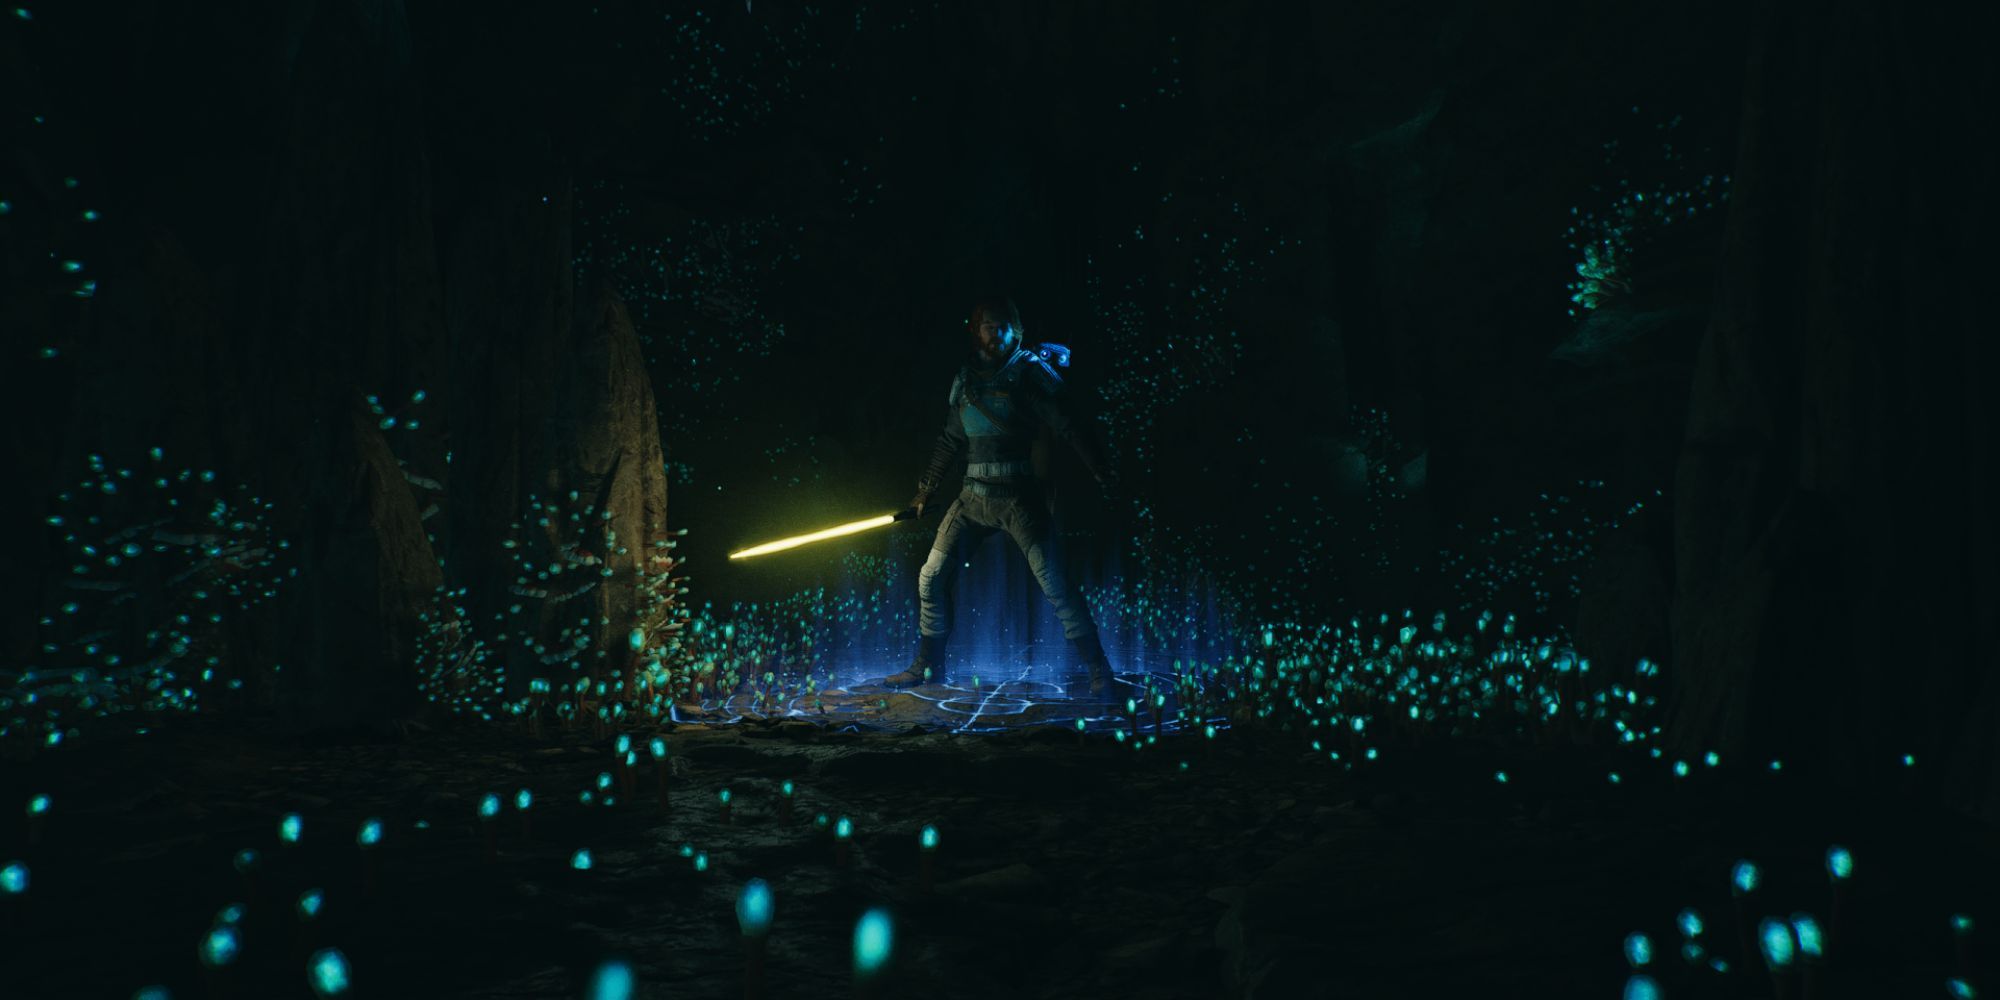 Cal stands on a glowing meditation point in a cave while wielding his lightsaber